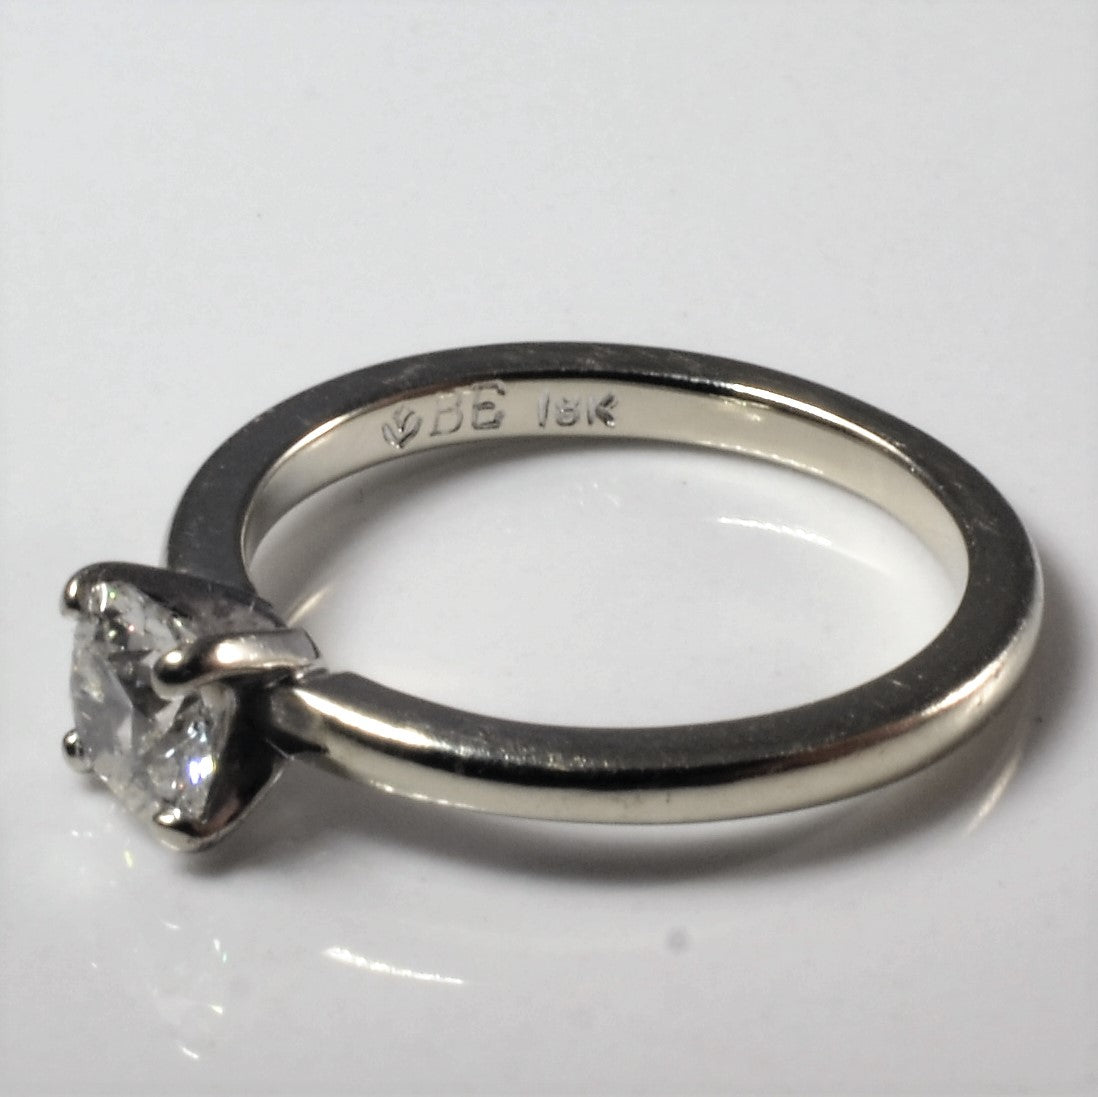 Brilliant Earth' Solitaire Engagement Ring | 0.67ct | SZ 5.5 |